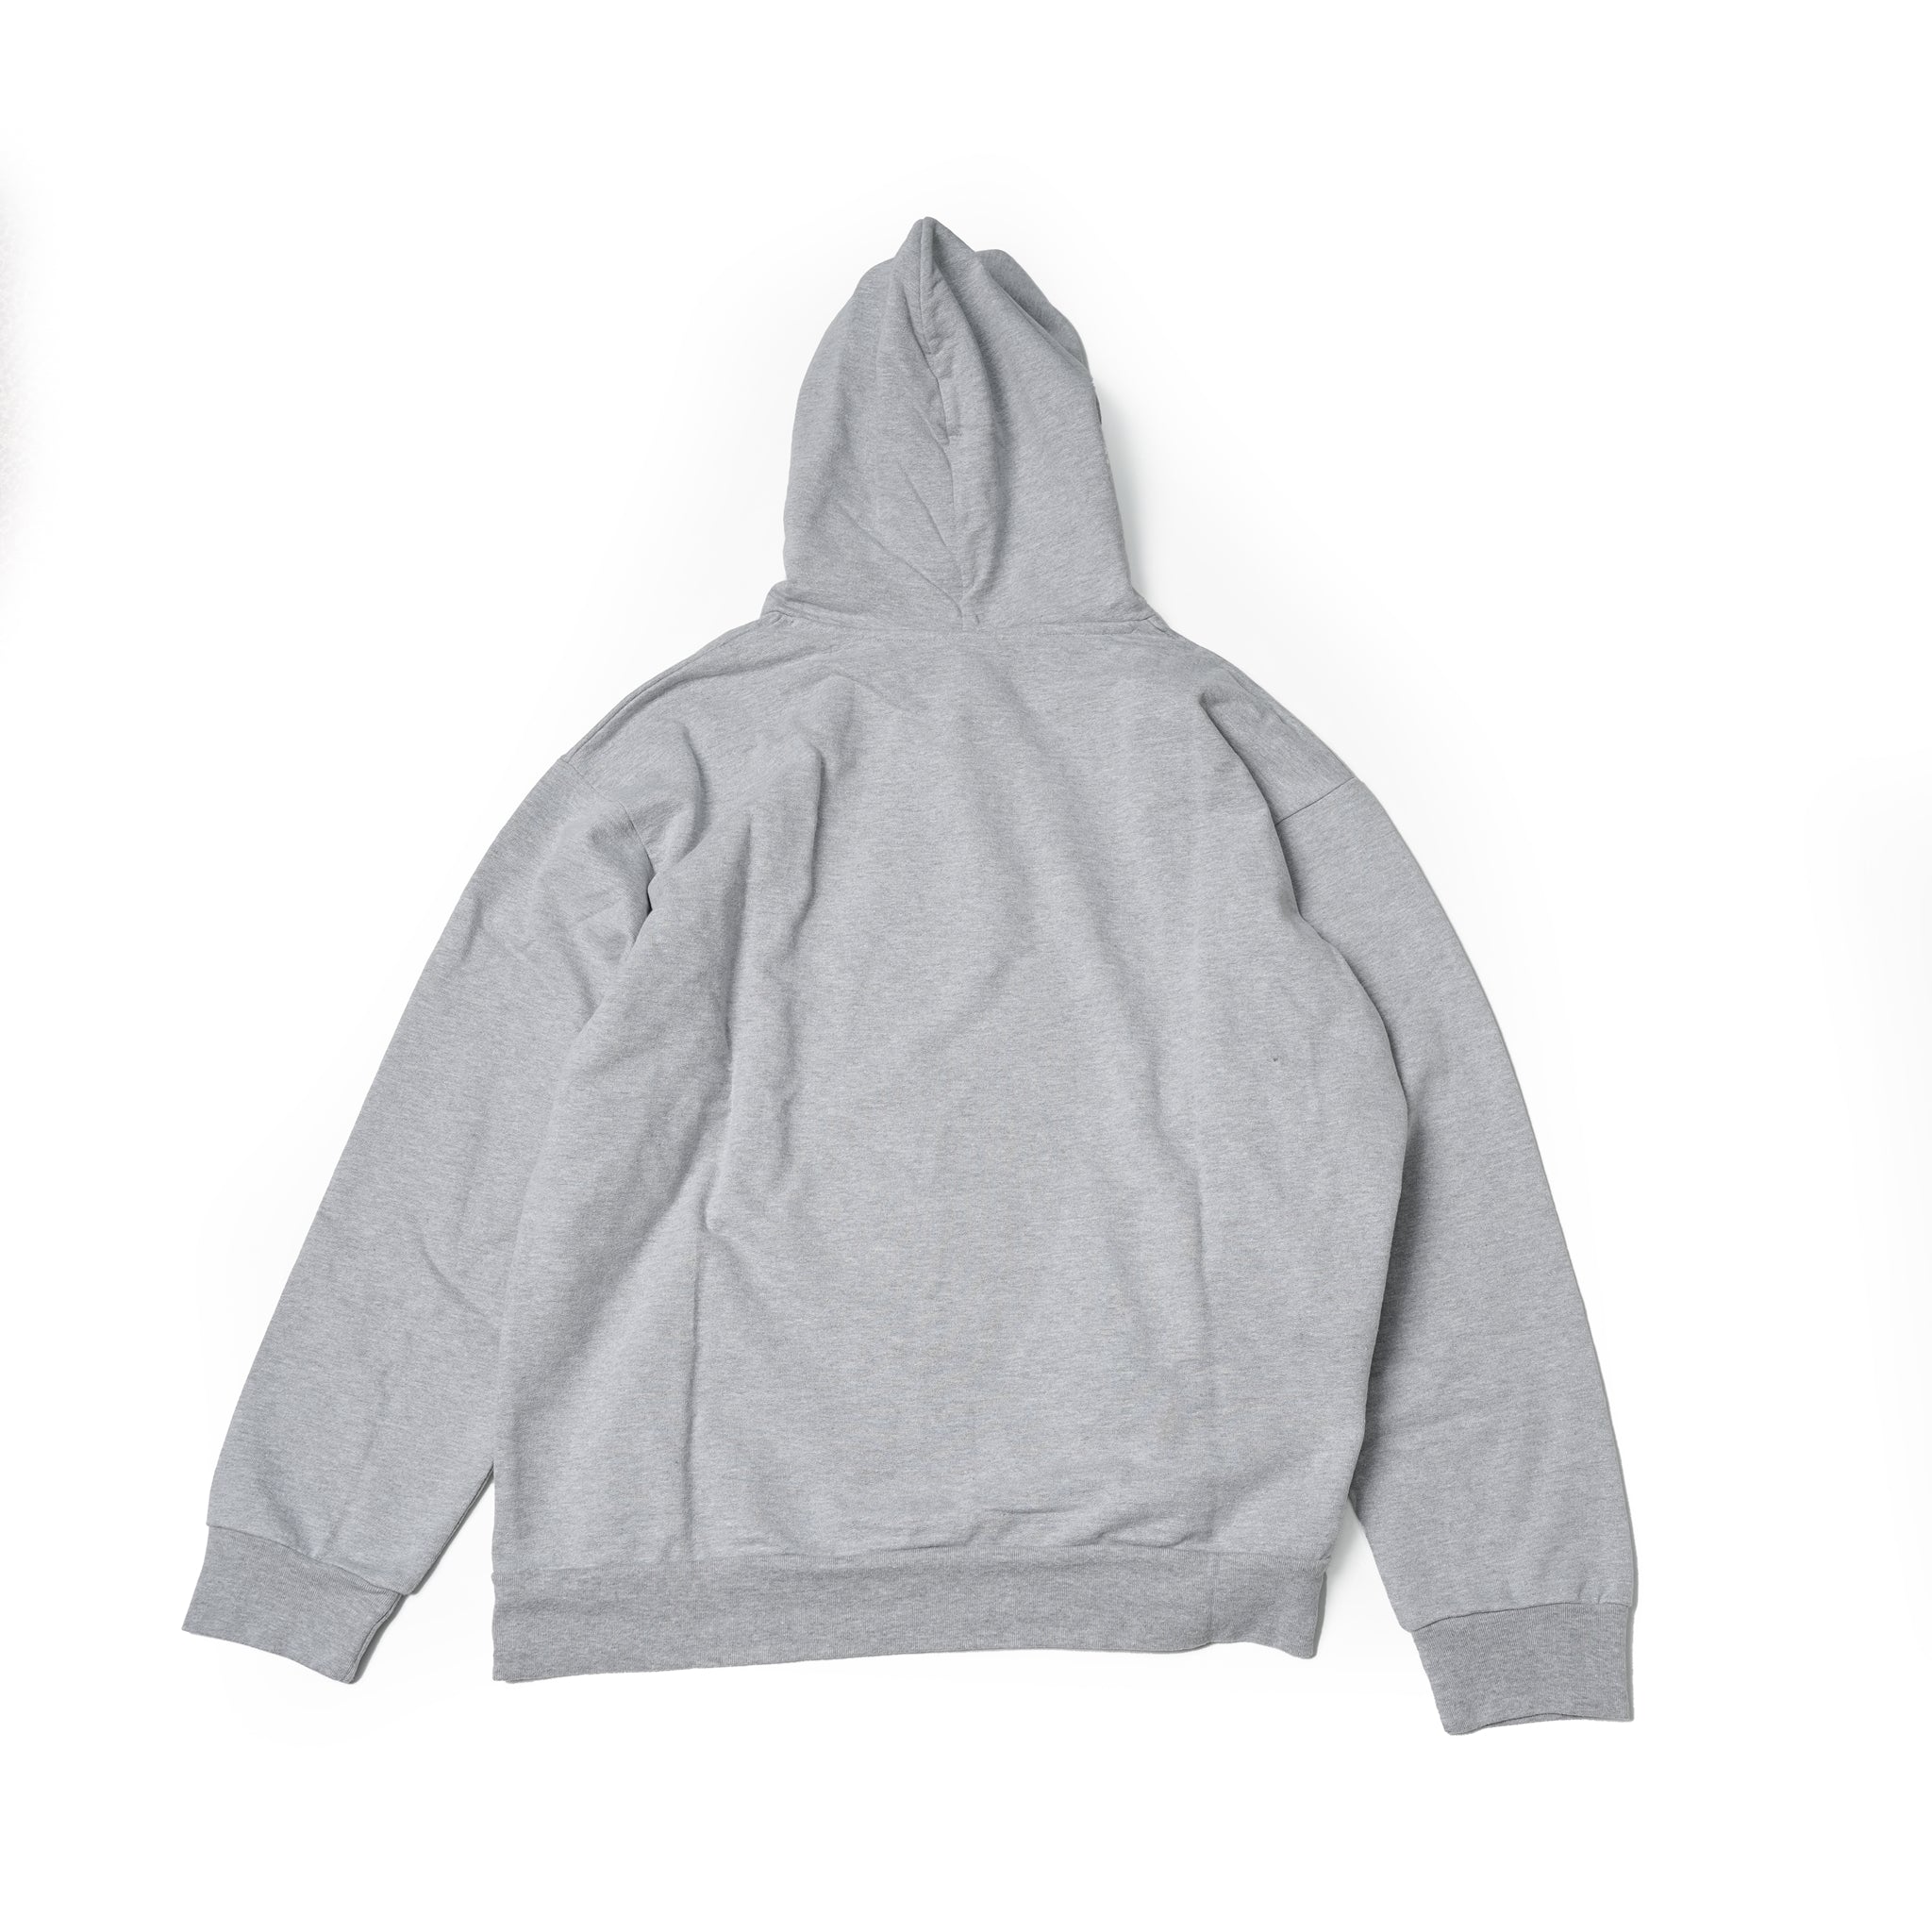 No:TS00358 | Name:TIRED'S HOODIE (ORGANIC COTTON) | Color:Heather Grey【TIRED_タイレッド】